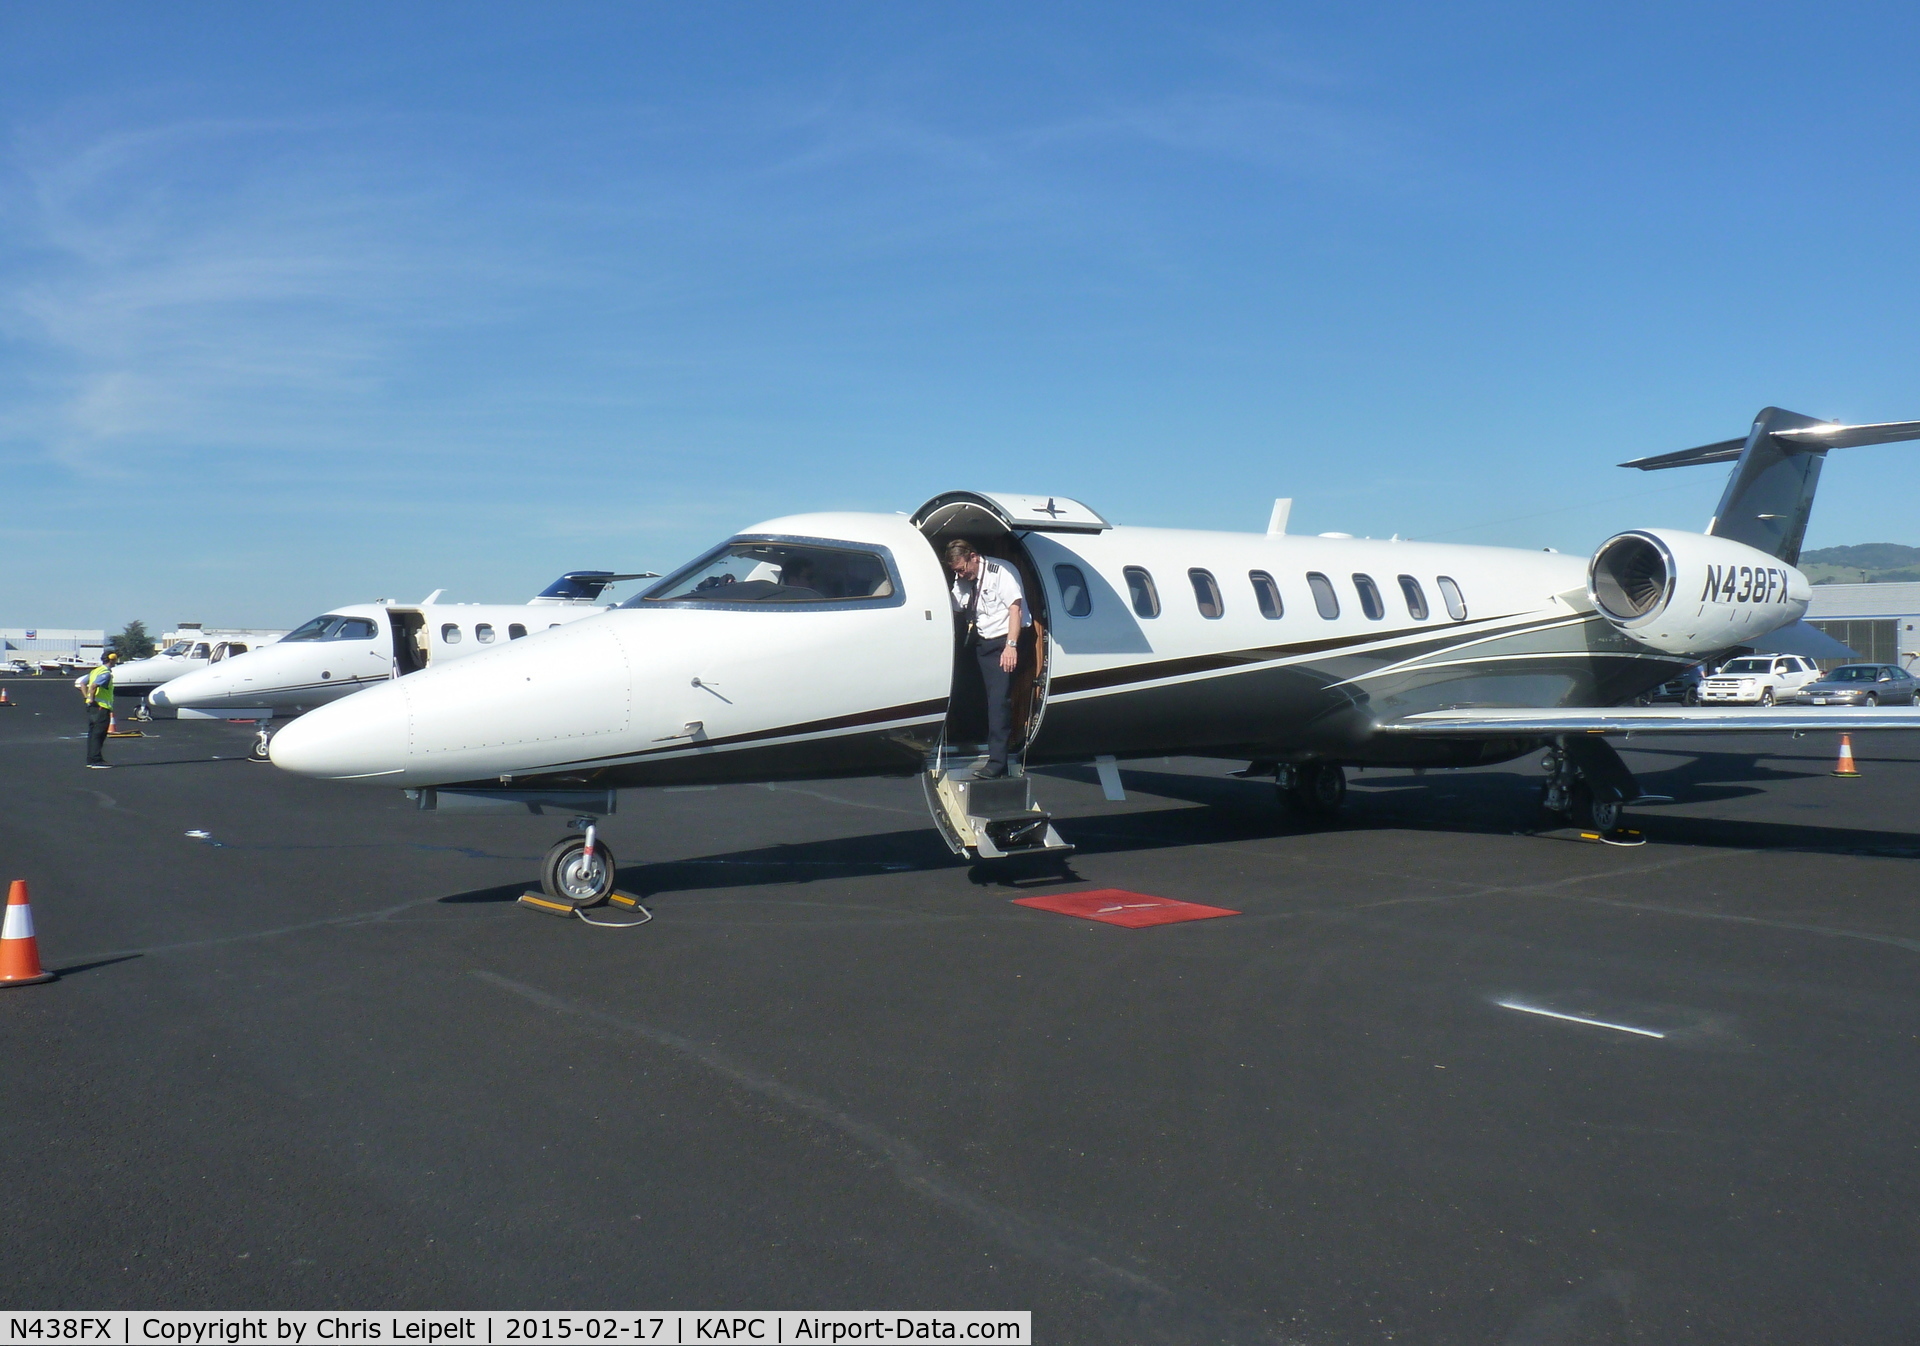 N438FX, 2007 Learjet 45 C/N 333, A 2001 LearJet 45 sitting at the Napa Jet Center ramp along with a Phenom 300 at Napa Airport, CA.